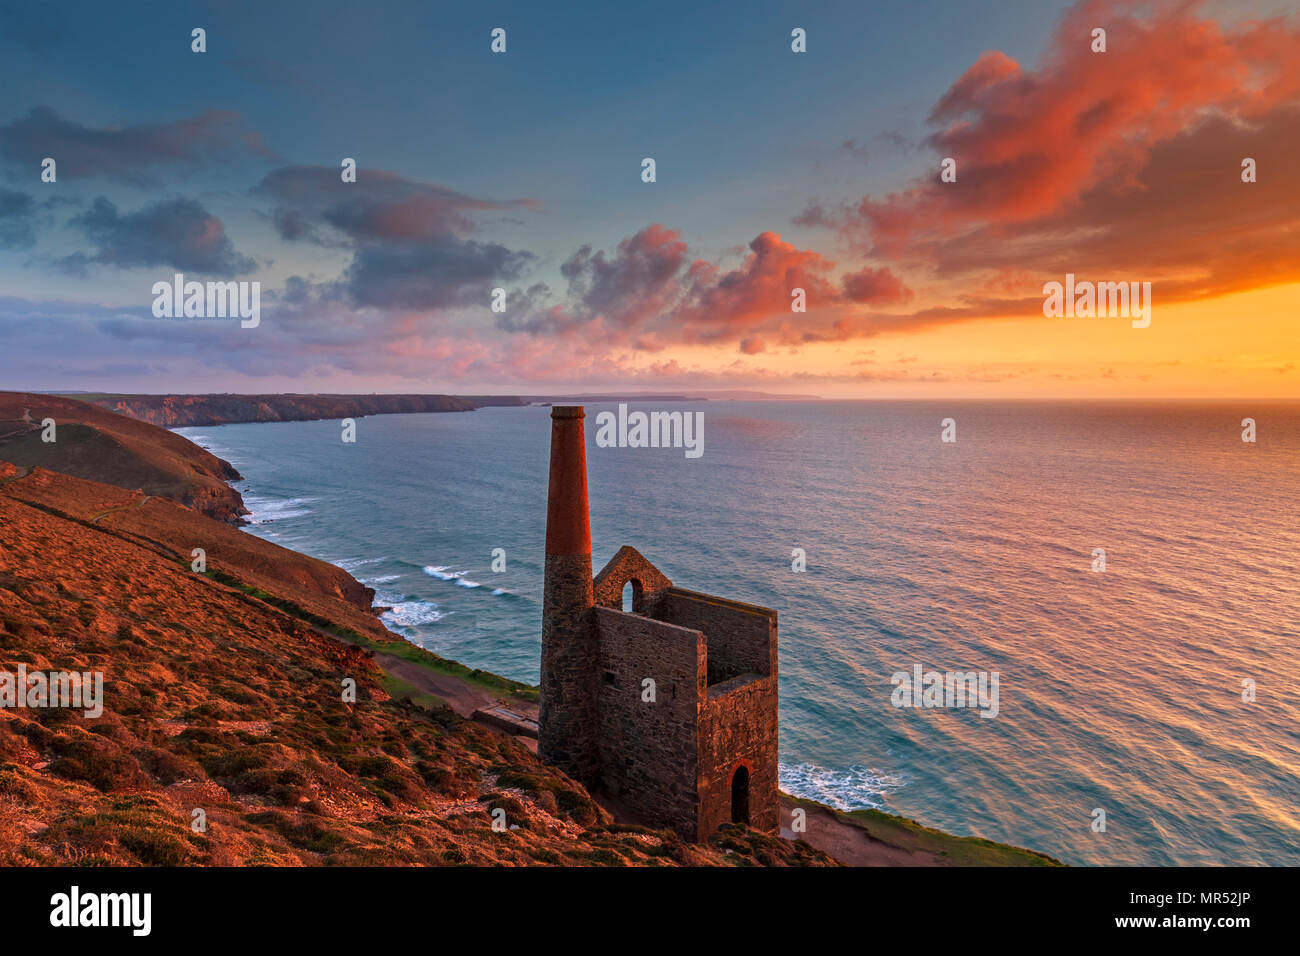 A Spring Sunset over Towanroath Engine House, Chapel Porth, Cornwall Stock Photo